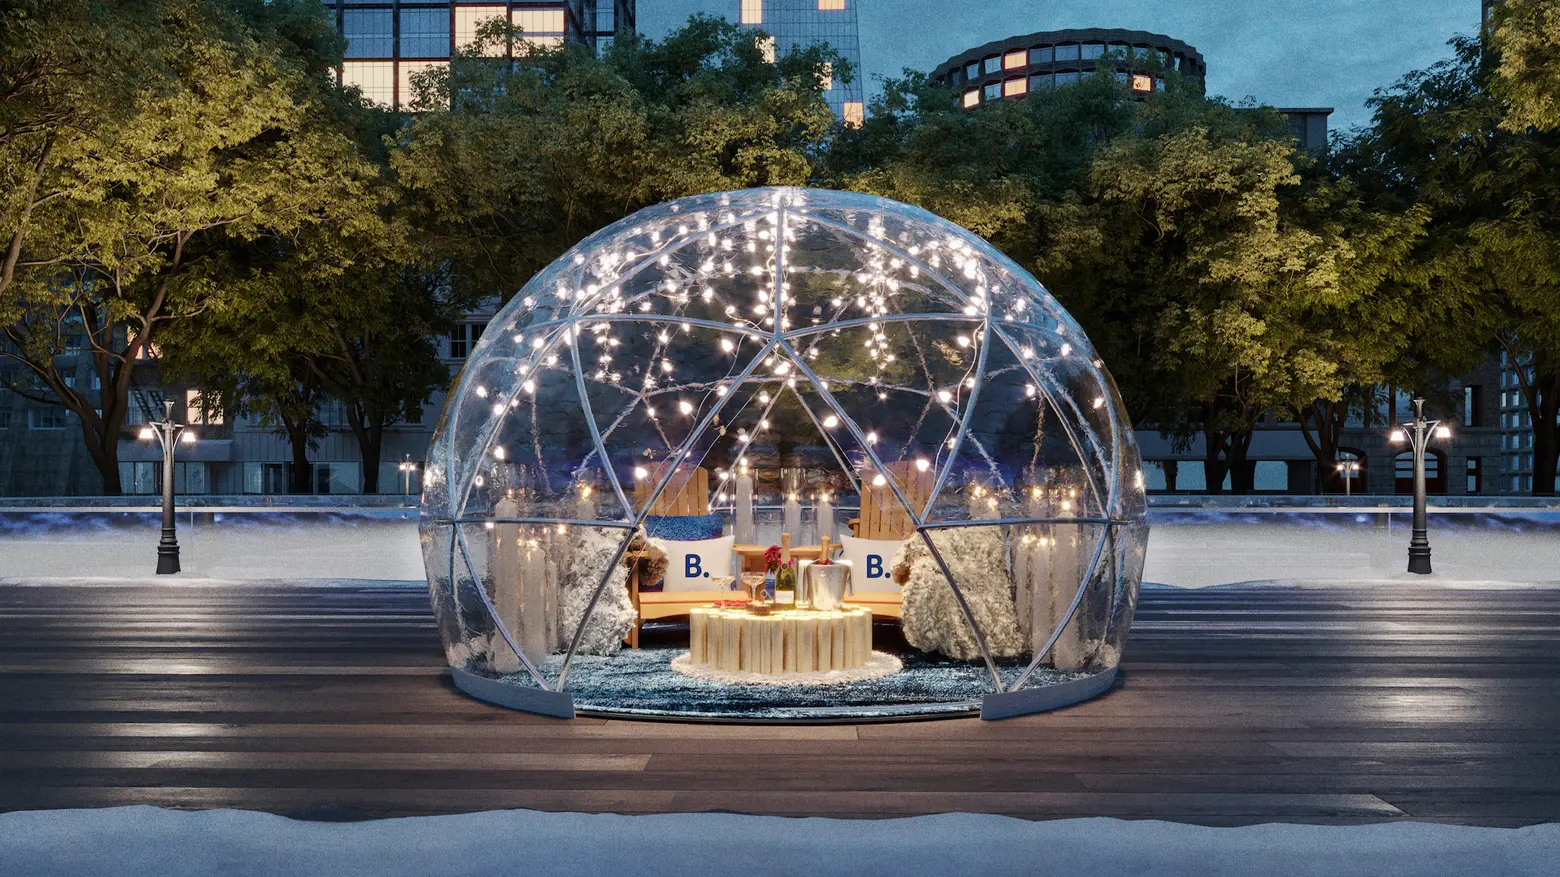 You can stay overnight at Bryant Park’s Winter Village this Valentine’s Day